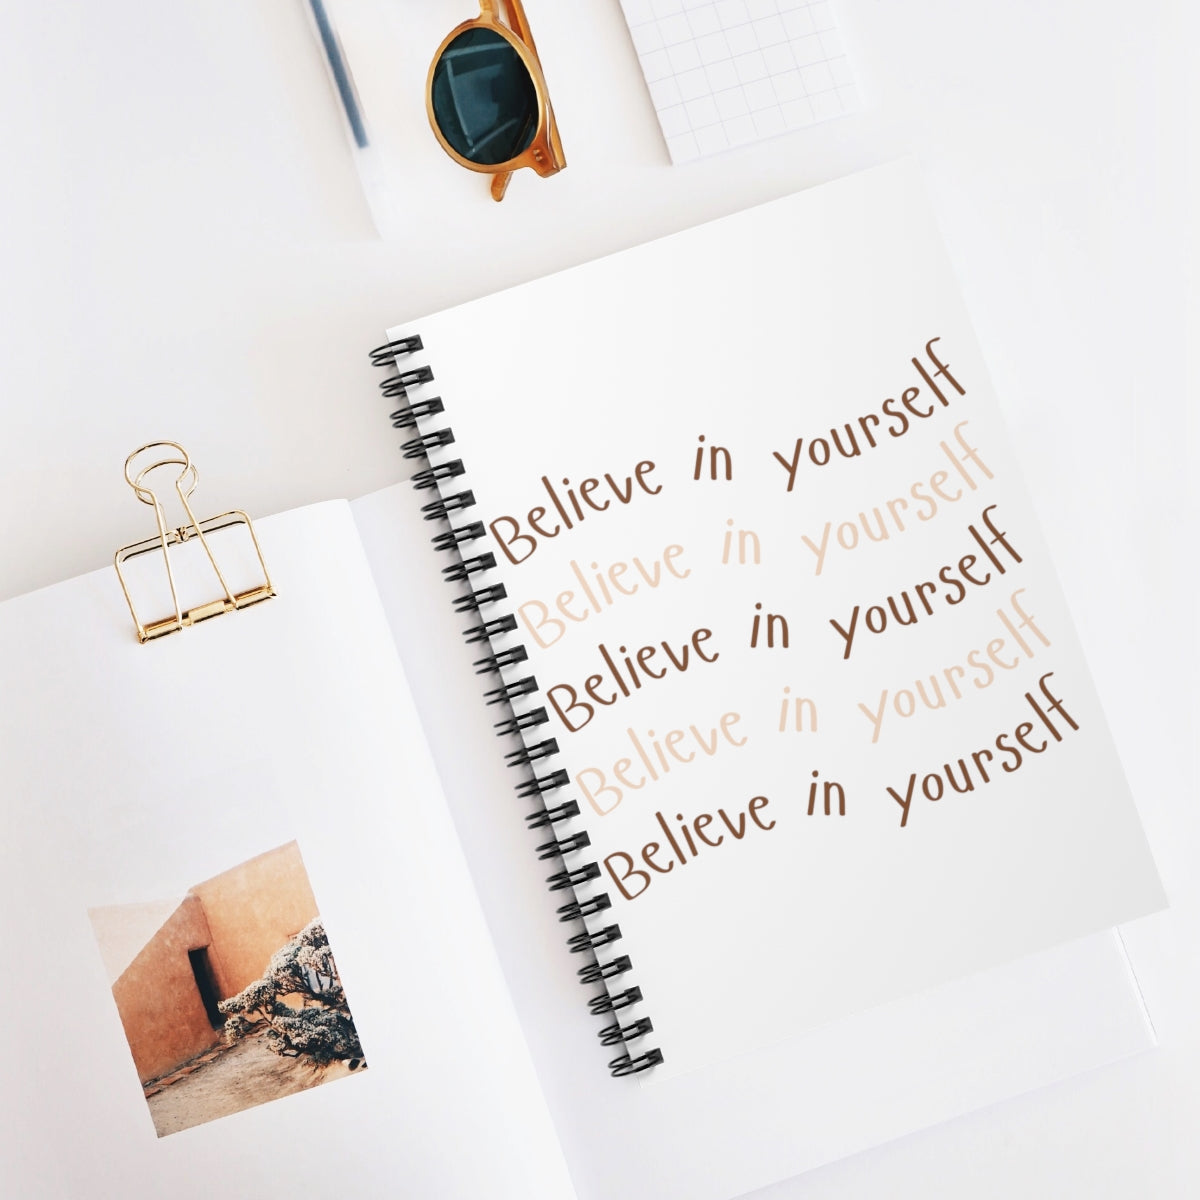 Believe In Yourself Motivational Durable Journal- Motivational Notebook, Inspirational Notebooks, Women’s Inspirational Journal, Self-Care Gift for Friends, Daily Motivational Journal